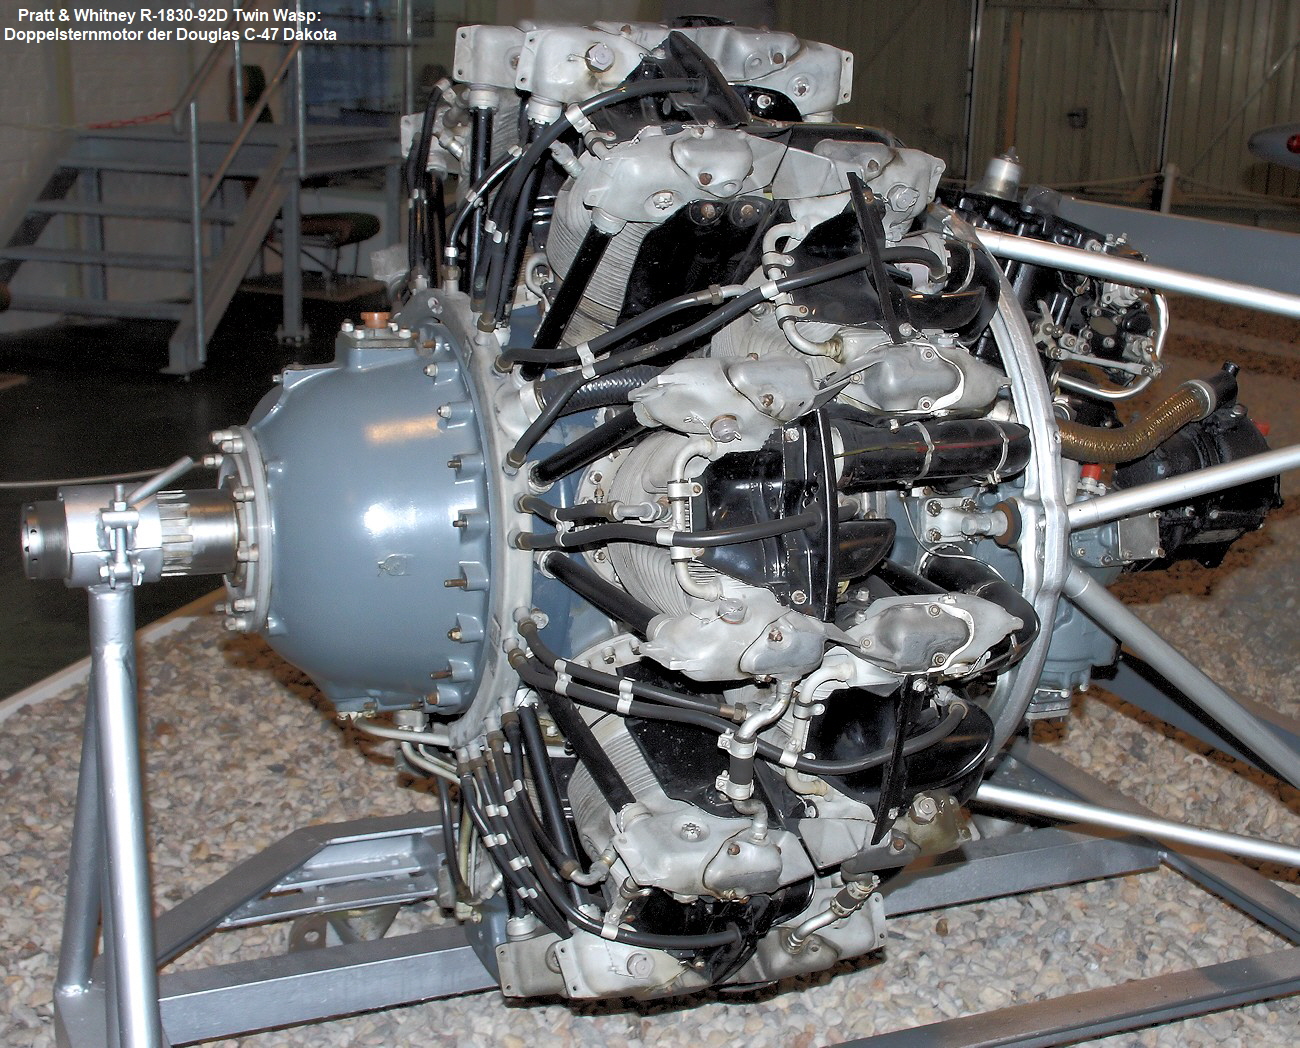 Pratt and Whitney-R-1830-92D-Twin-Wasp